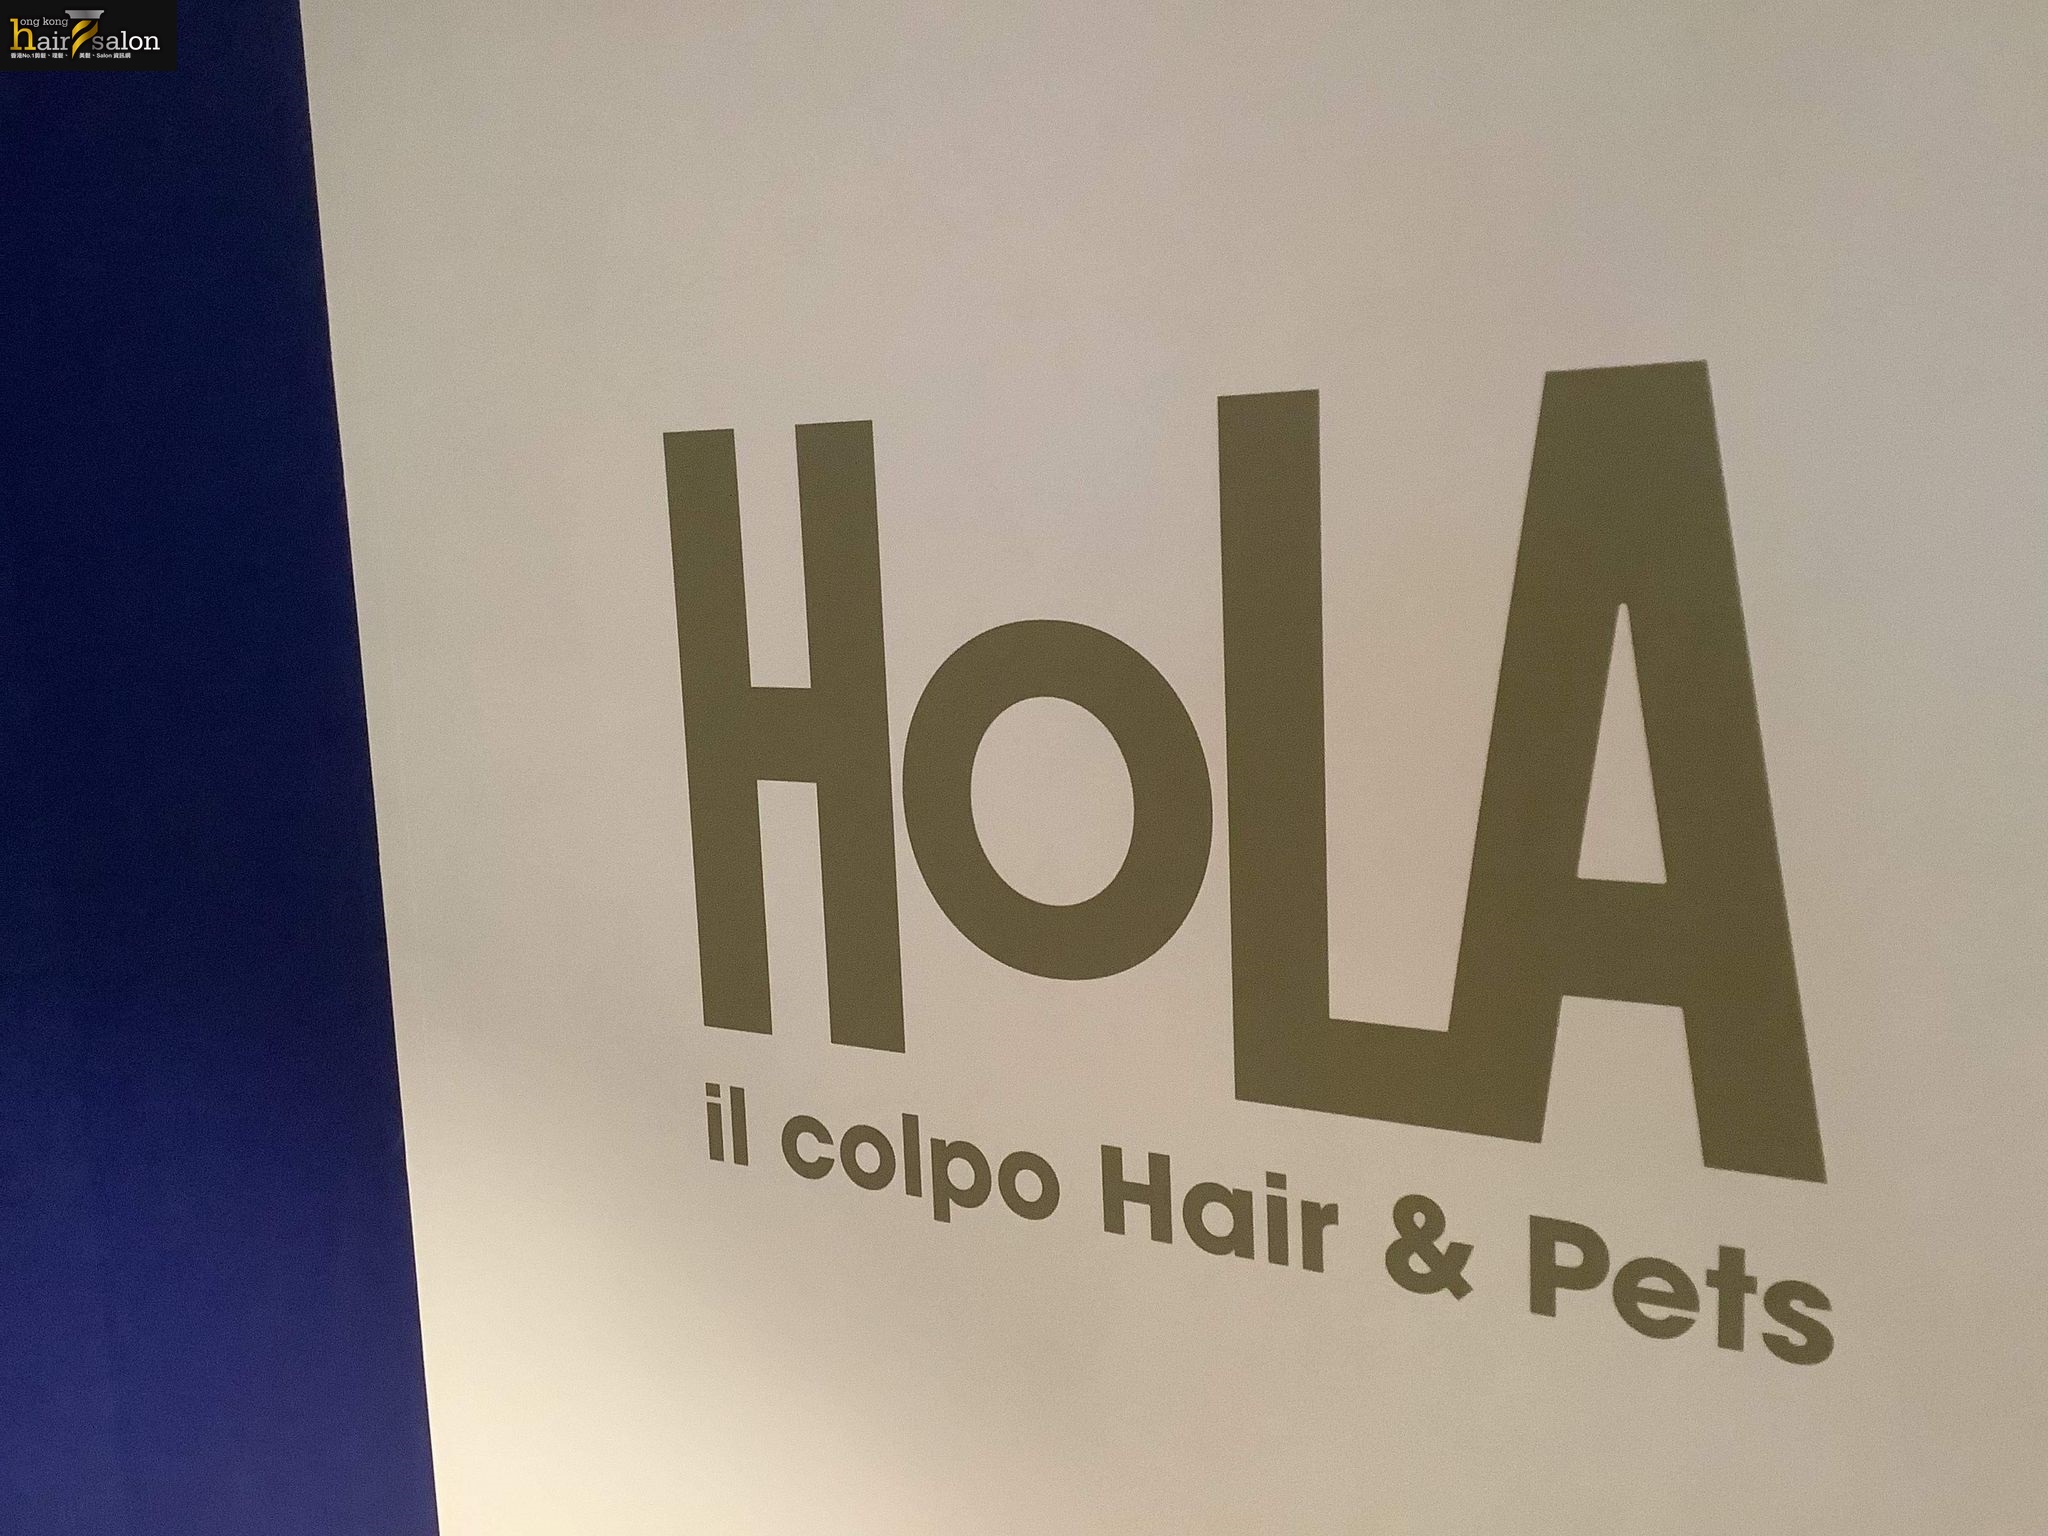 Electric hair: Hola il Colpo hairs & pets